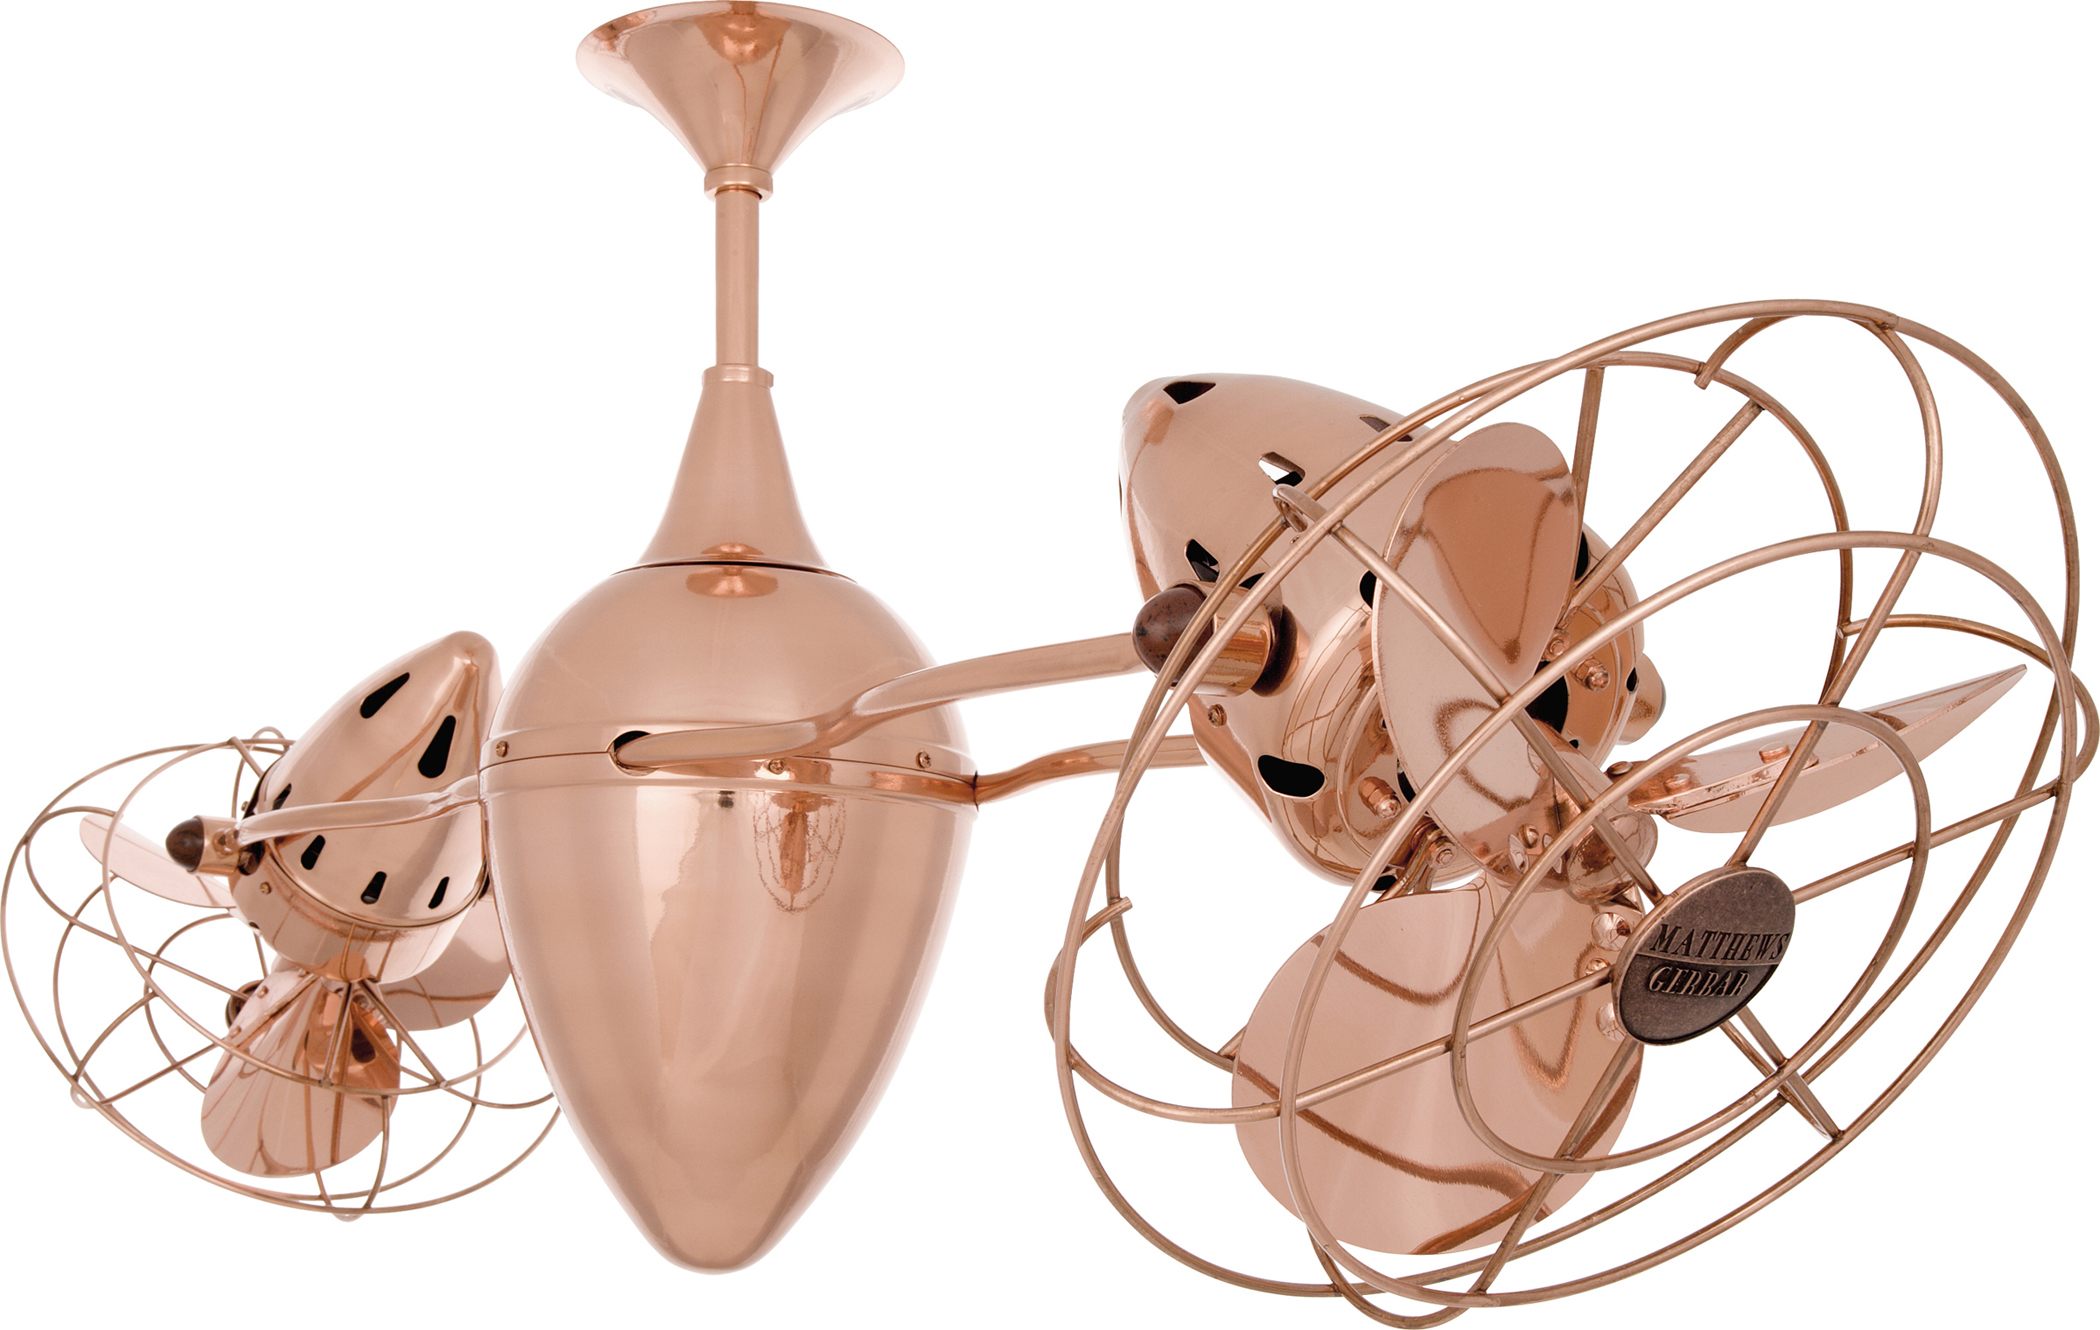 Ar Ruthiane Dual Headed Rotational Ceiling fan in Polished Copper with Metal Blades